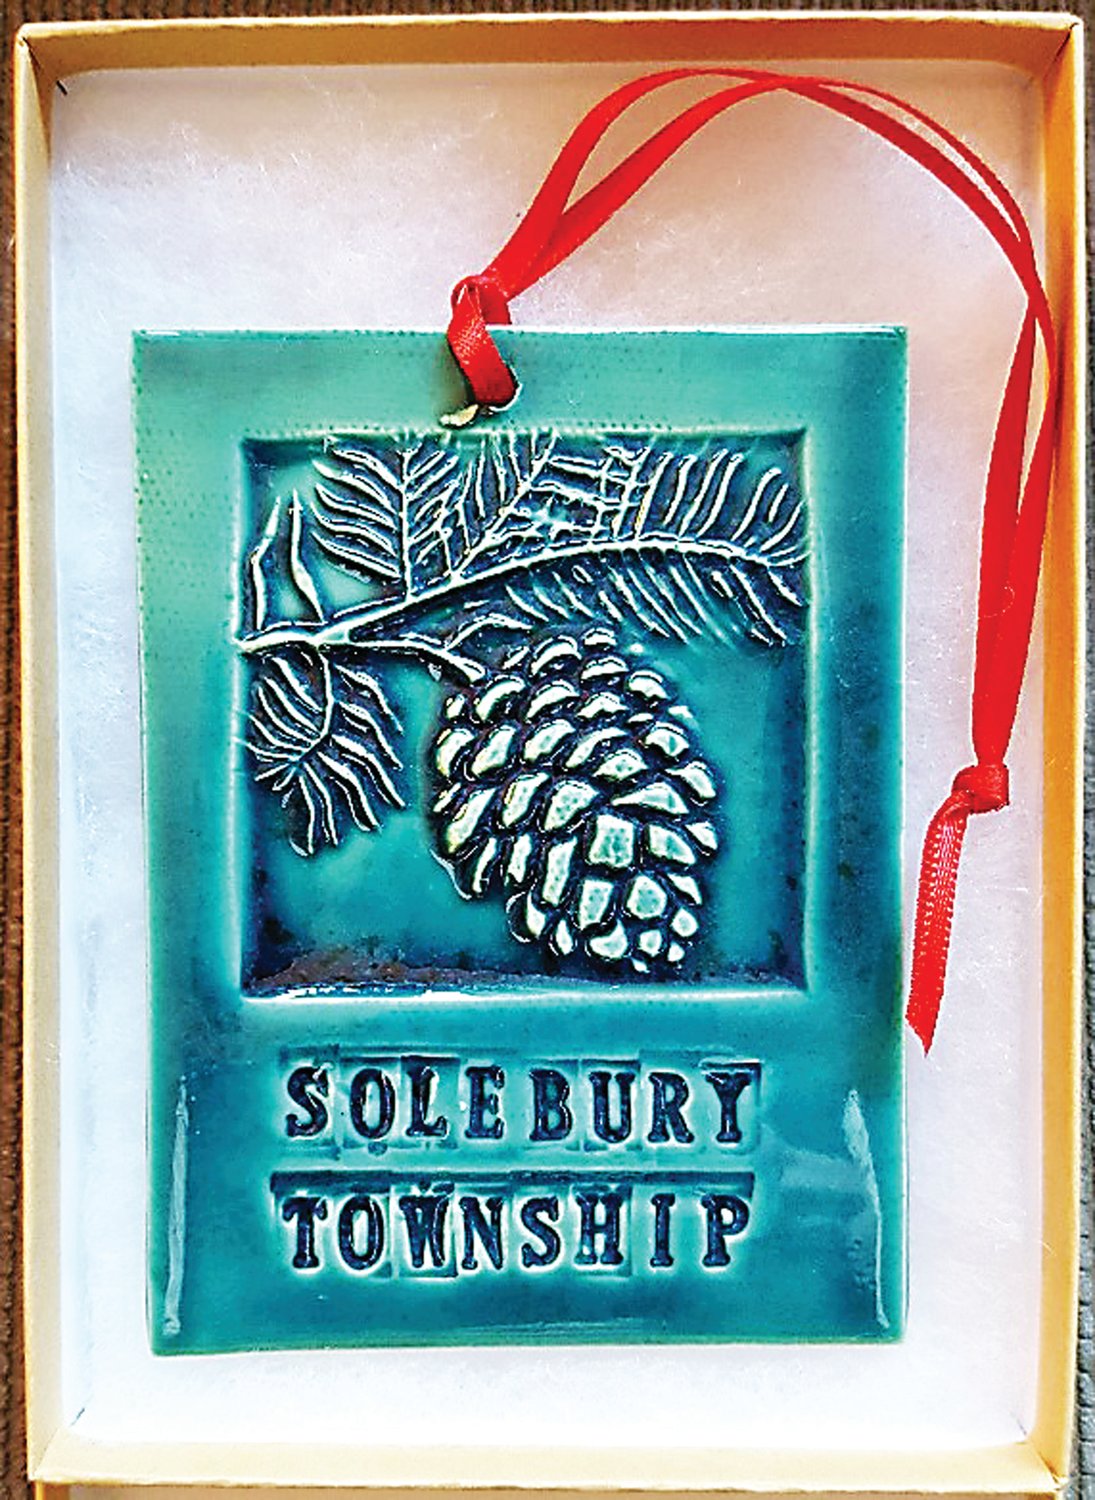 Solebury Township’s 2019 holiday tile is for sale while supplies last.